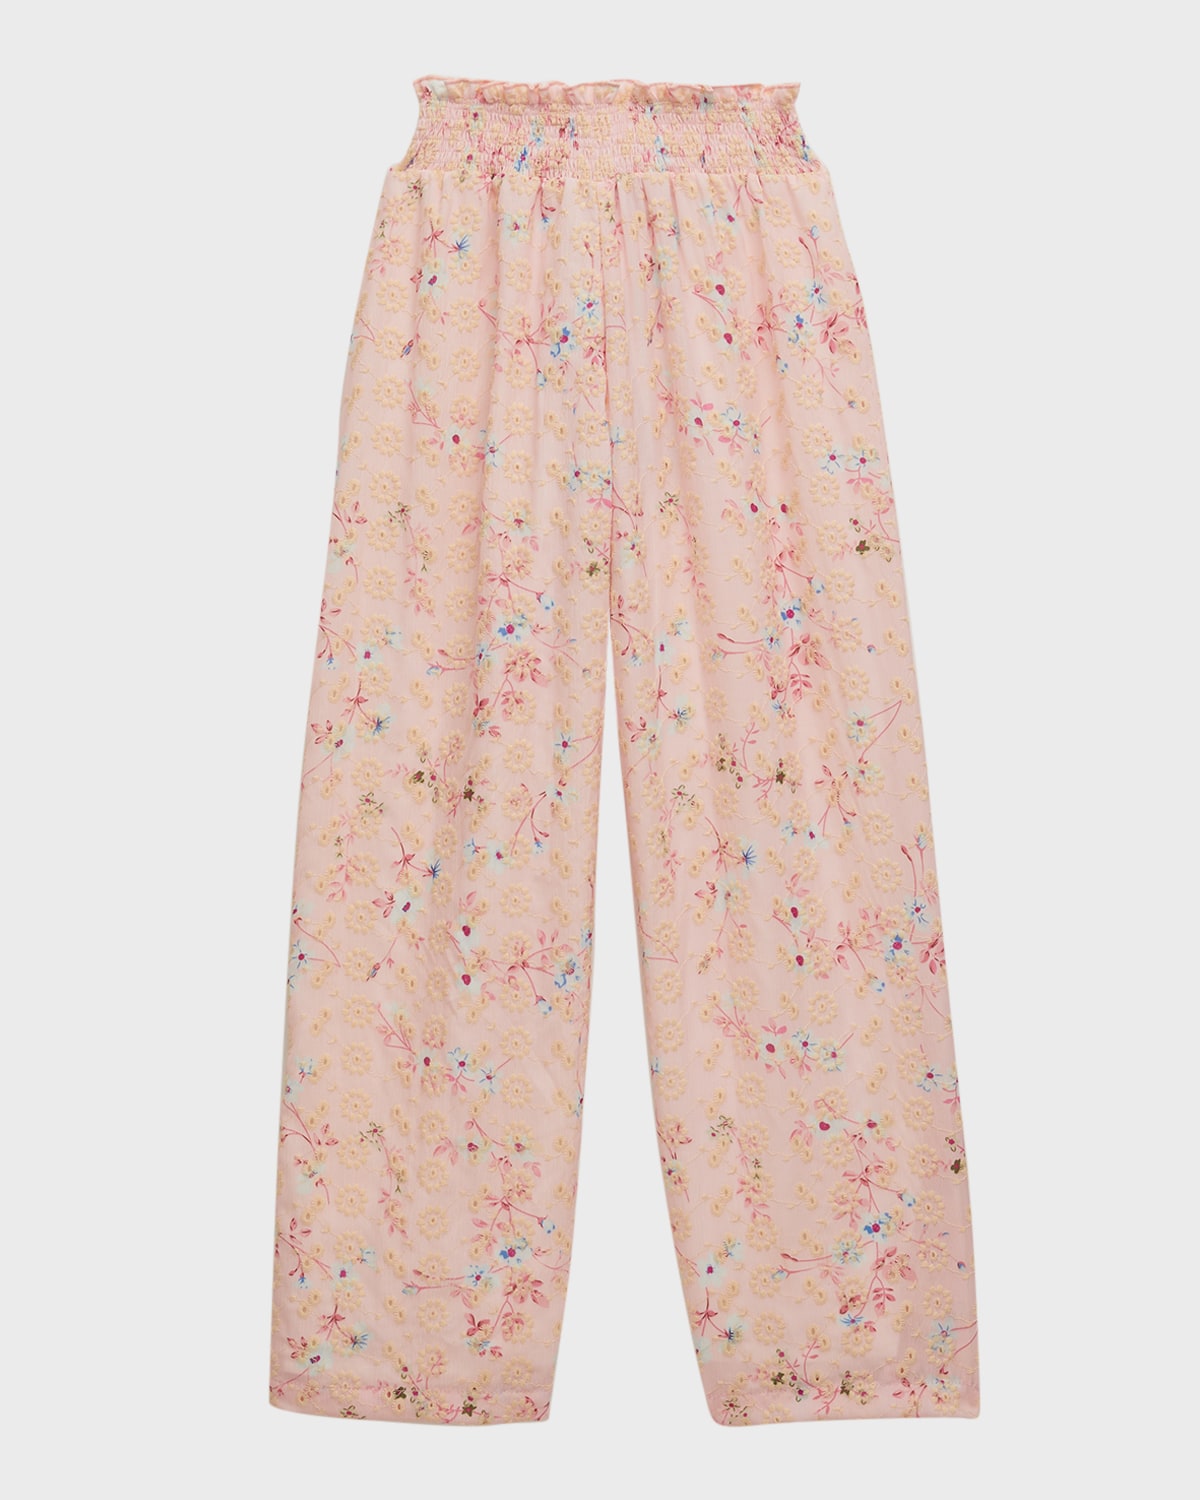 Flowers By Zoe Kids' Girl's Floral-print Eyelet Embroidered Smocked Pants In Pink